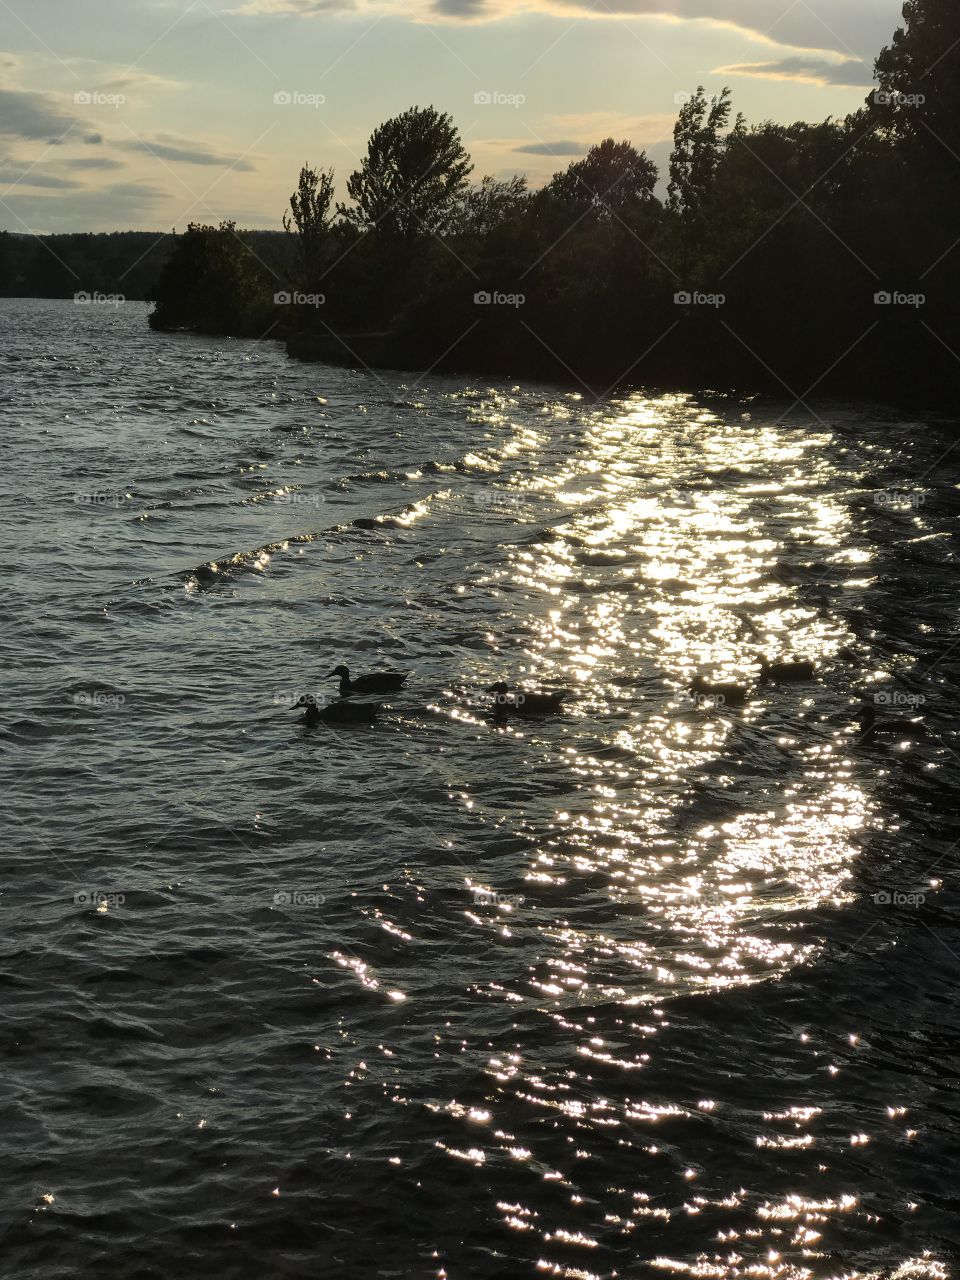 All the ducks in a row 